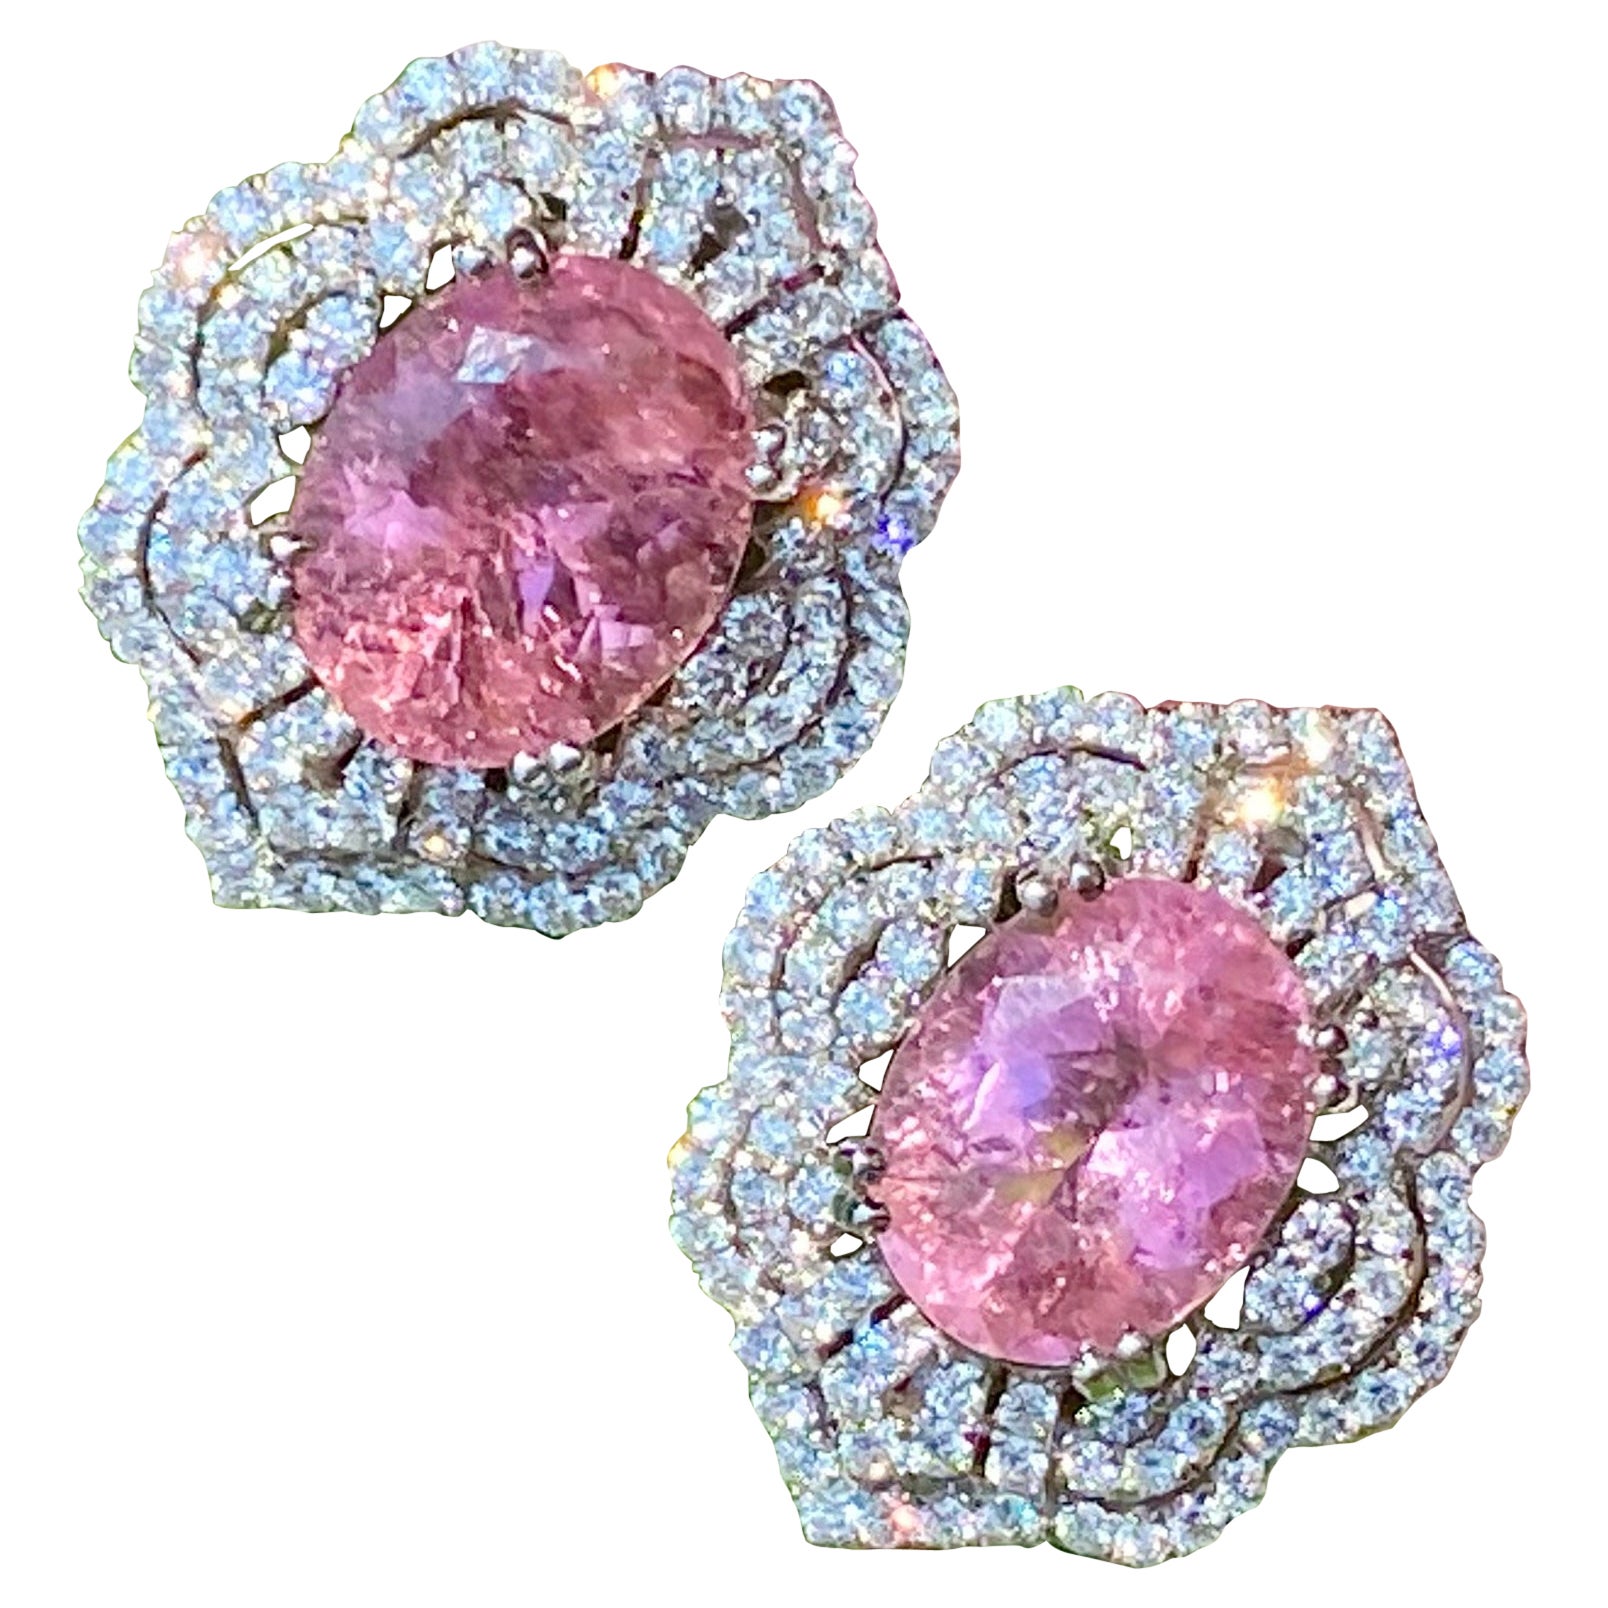 Exquisite Pair of 13 Carat Pink Tourmaline and Diamond 18K White Gold Earrings